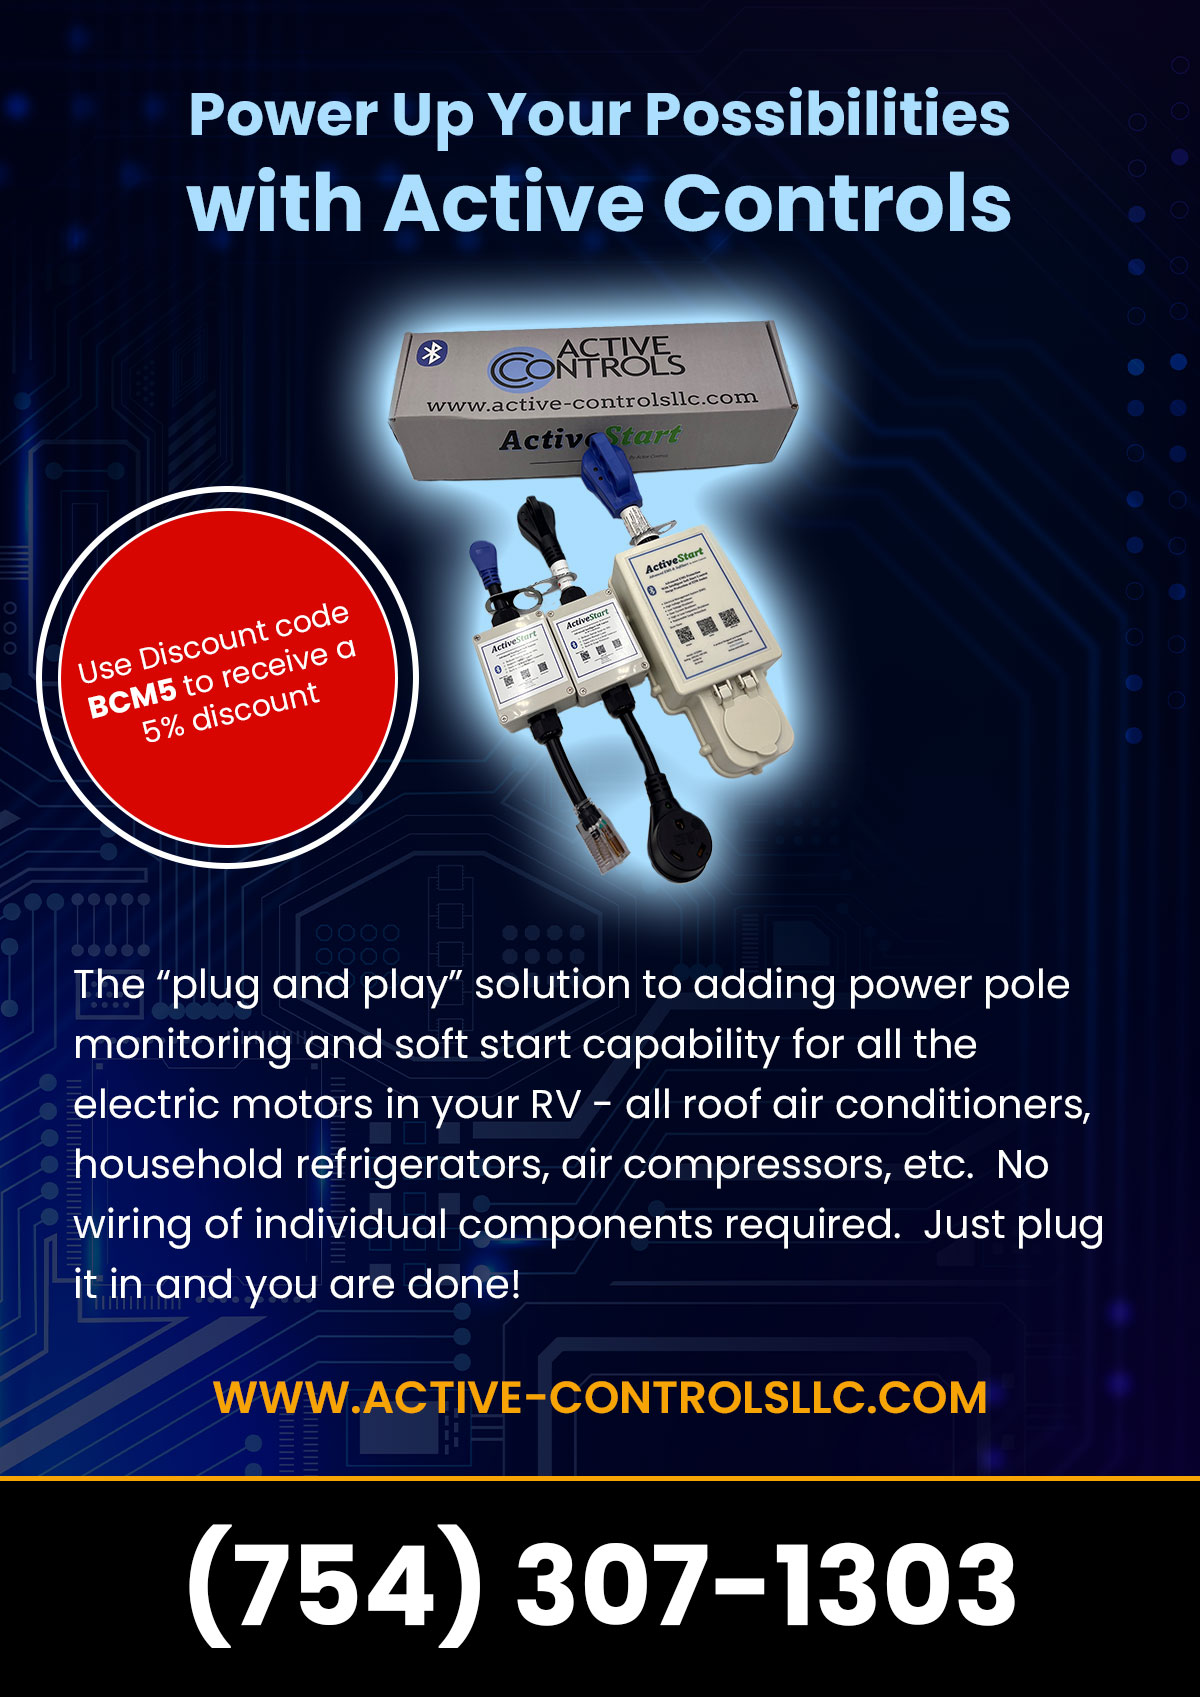 Active Controlsll 1/4 AD